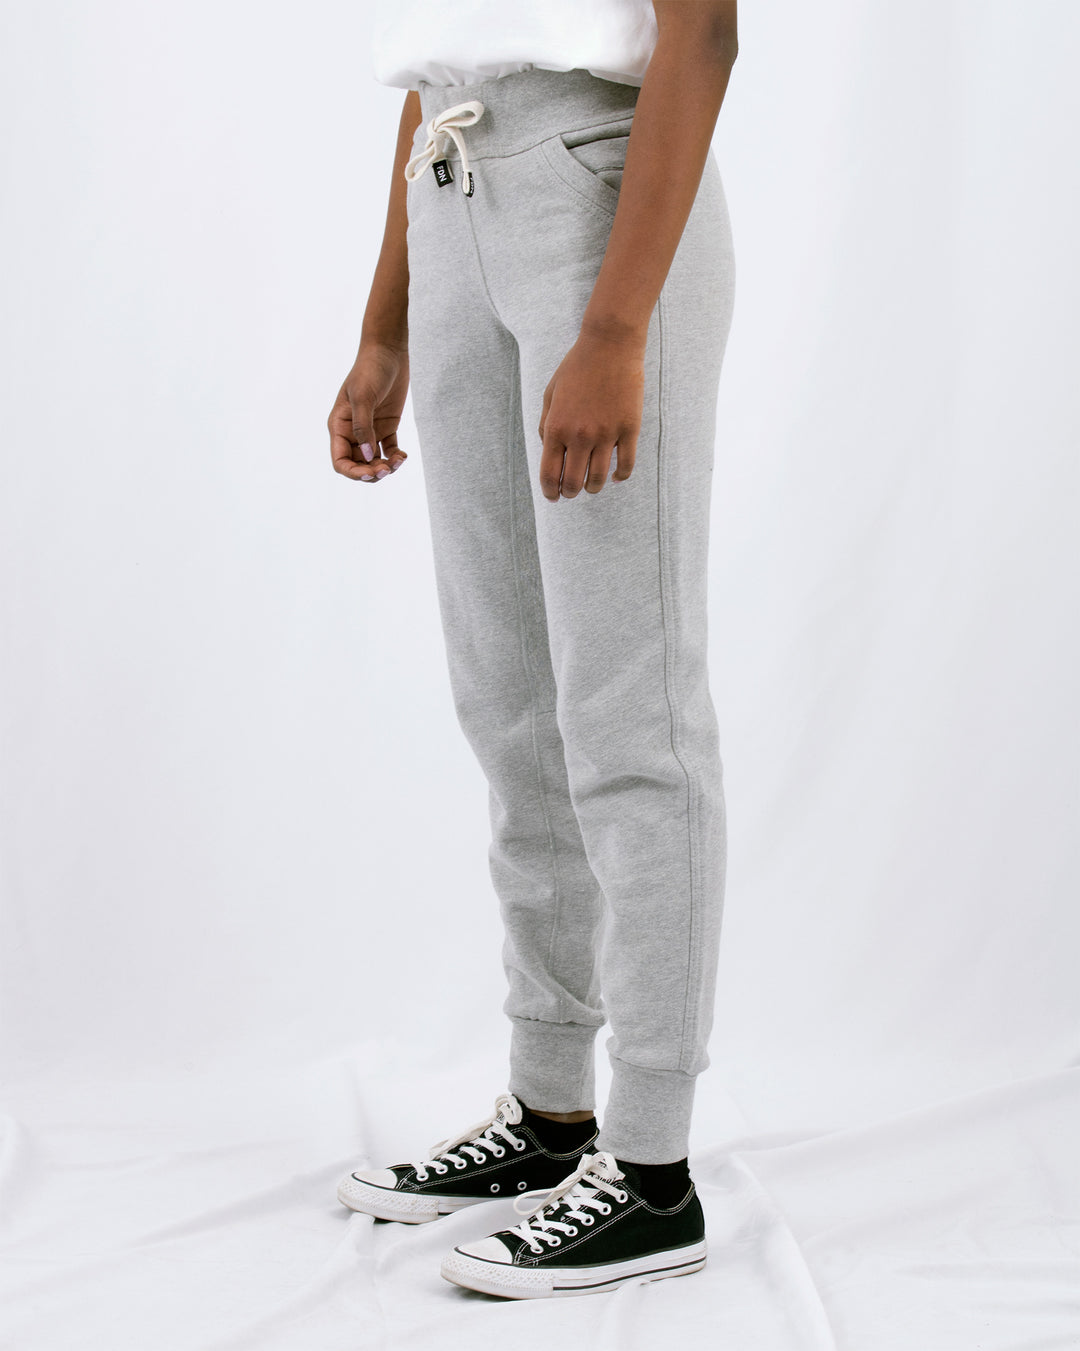 4-Pocket Sweat Pant - Made in Canada - 100% Cotton – FRÈRE DU NORD